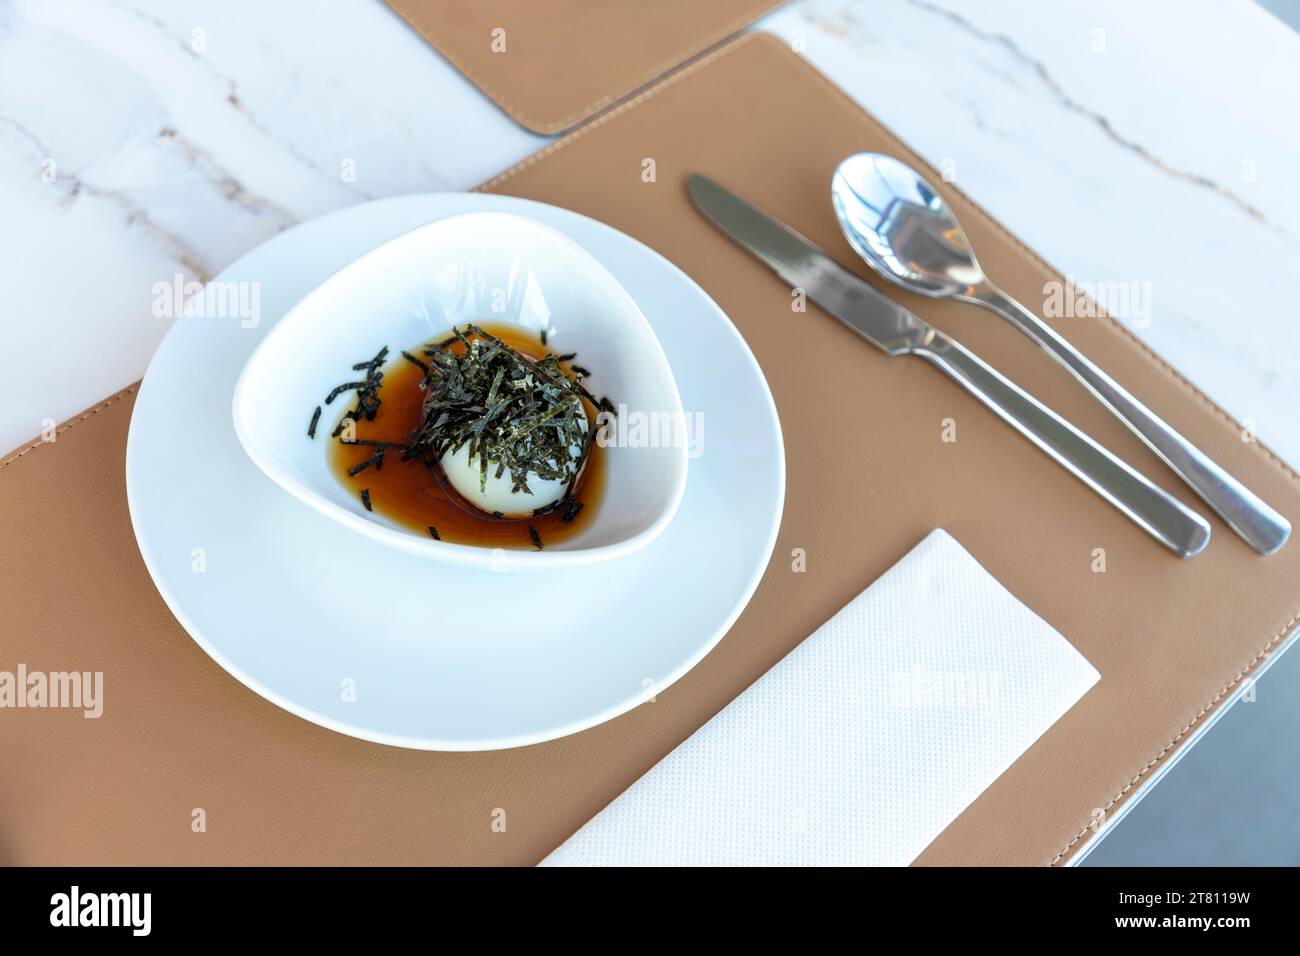 Onsen eggs soaked in sauce in a white bowl Sprinkle the top with shredded seaweed on the hotel's marble table. There is a placemat made from brown lea Stock Photo